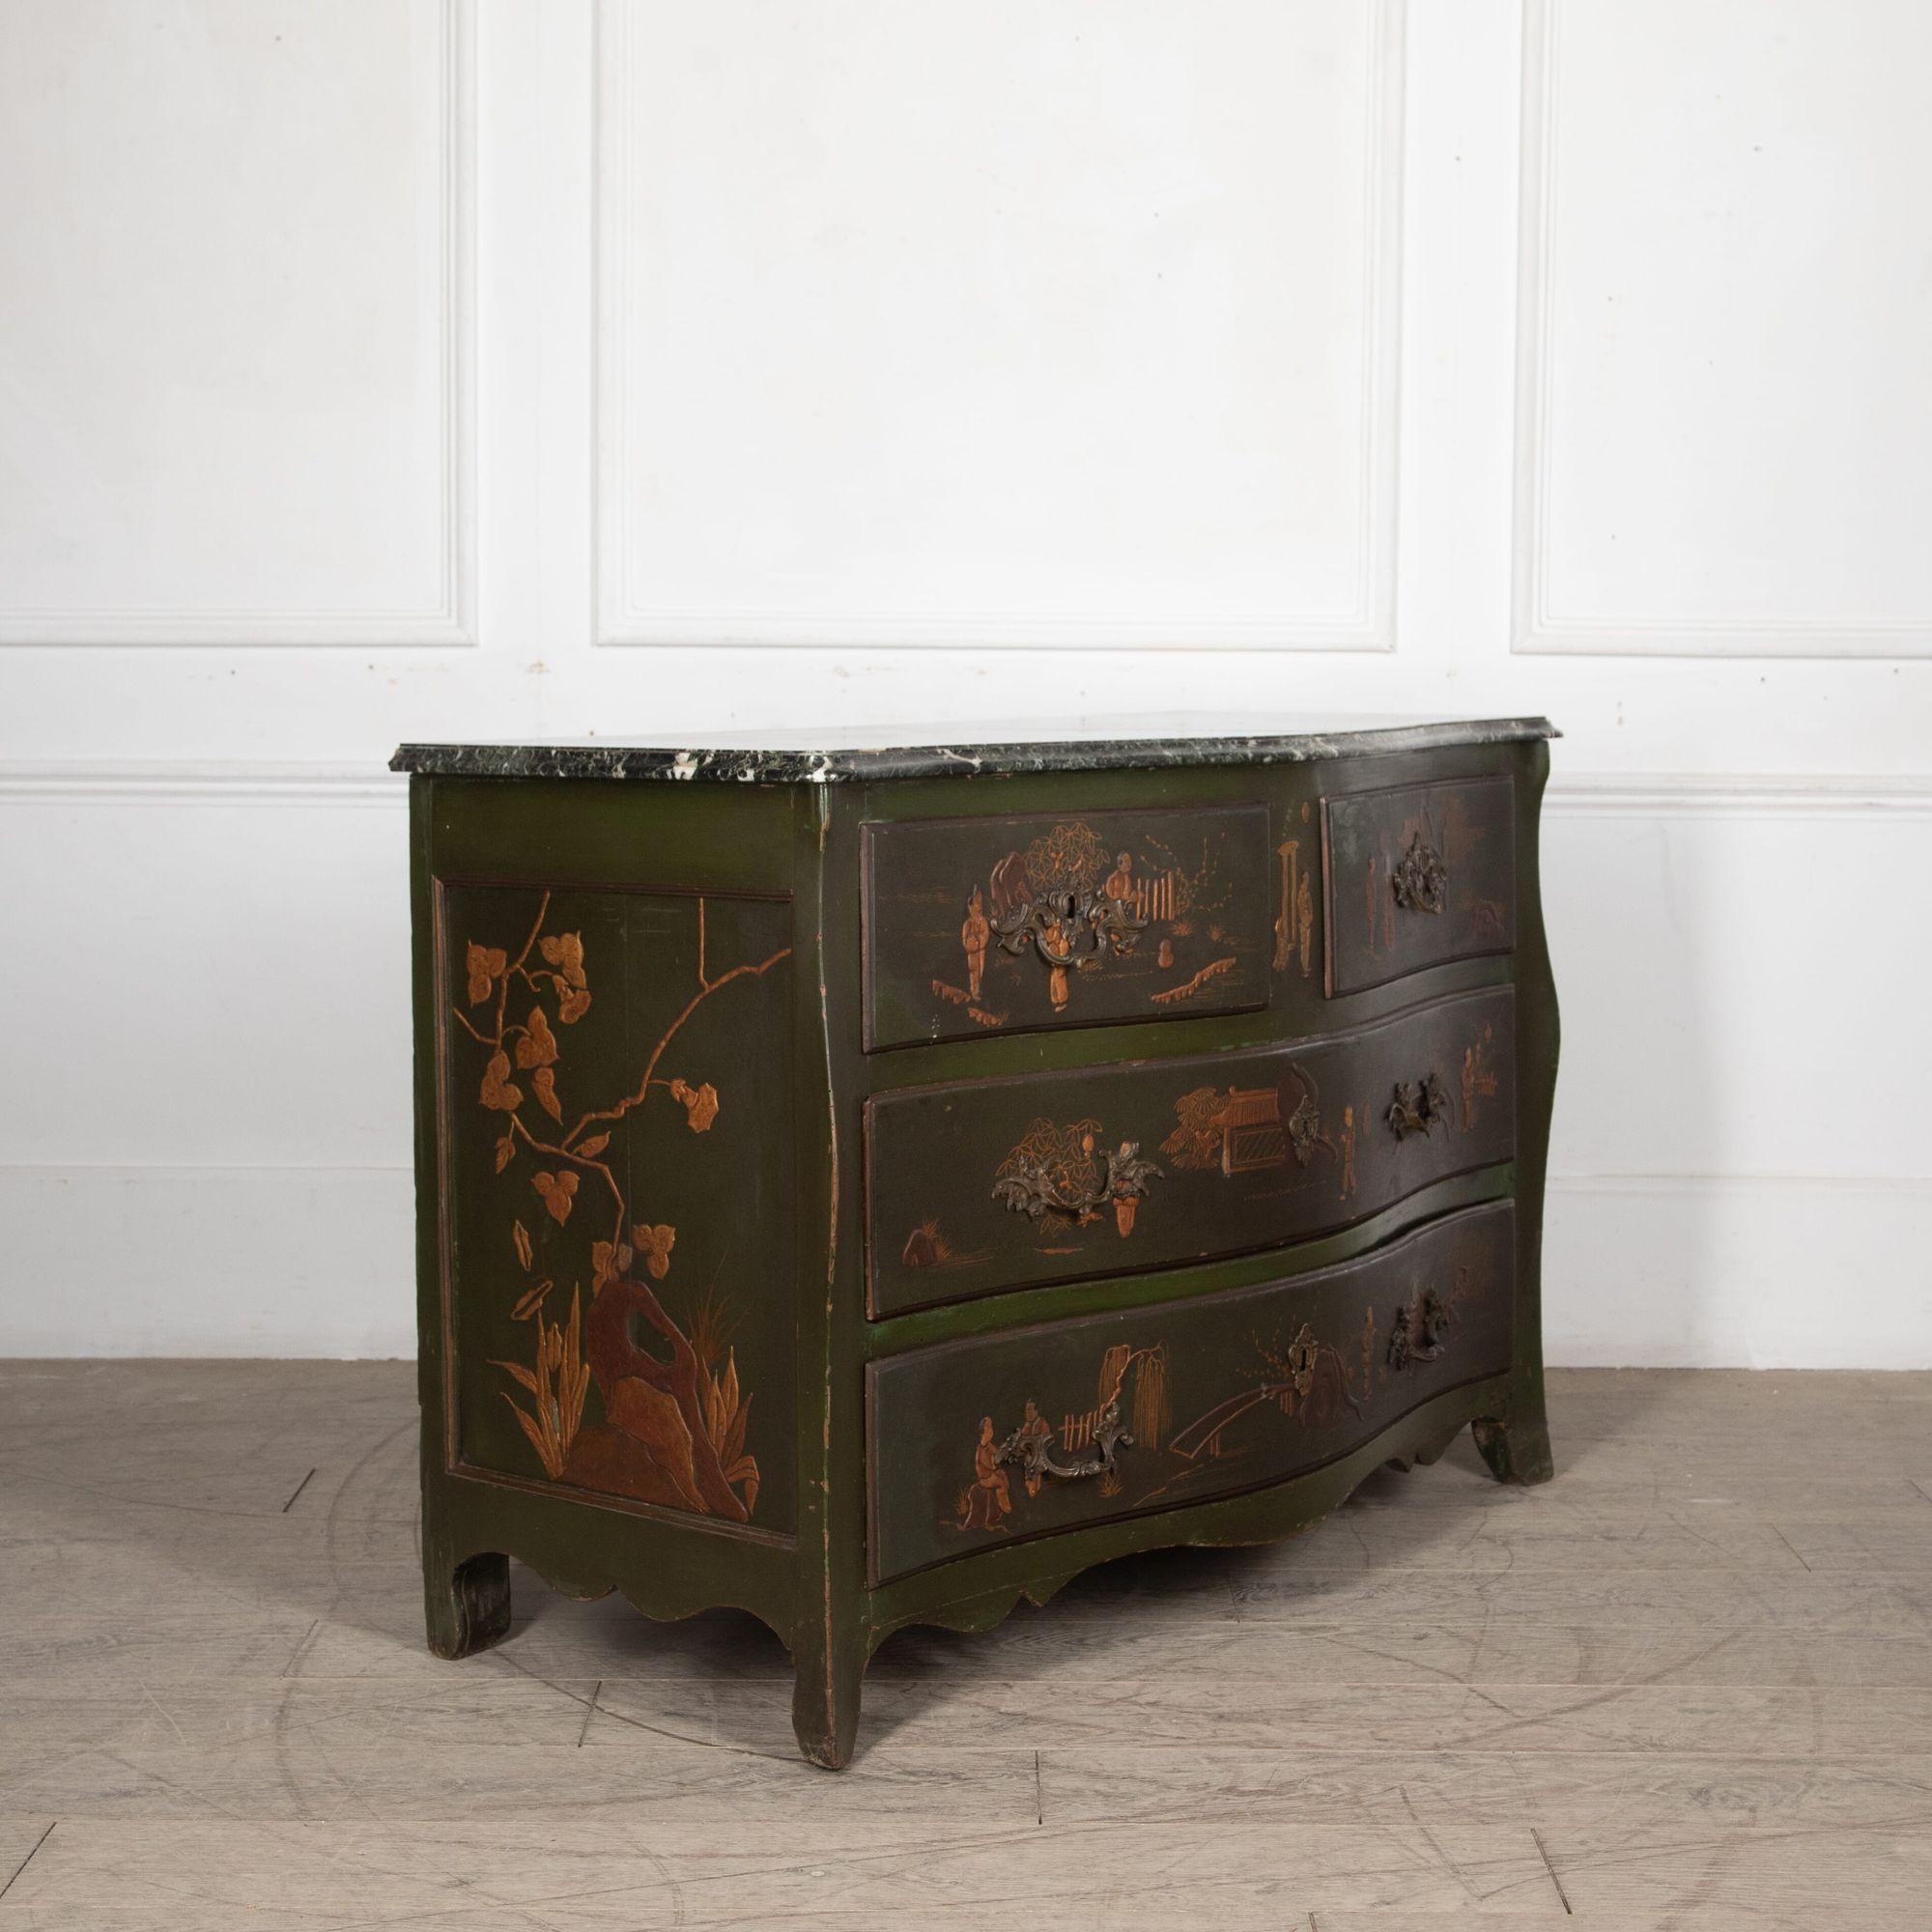 18th Century French green Chinese lacquer commode.
With a later green marble top, restoration throughout and original paper linings to the drawers.